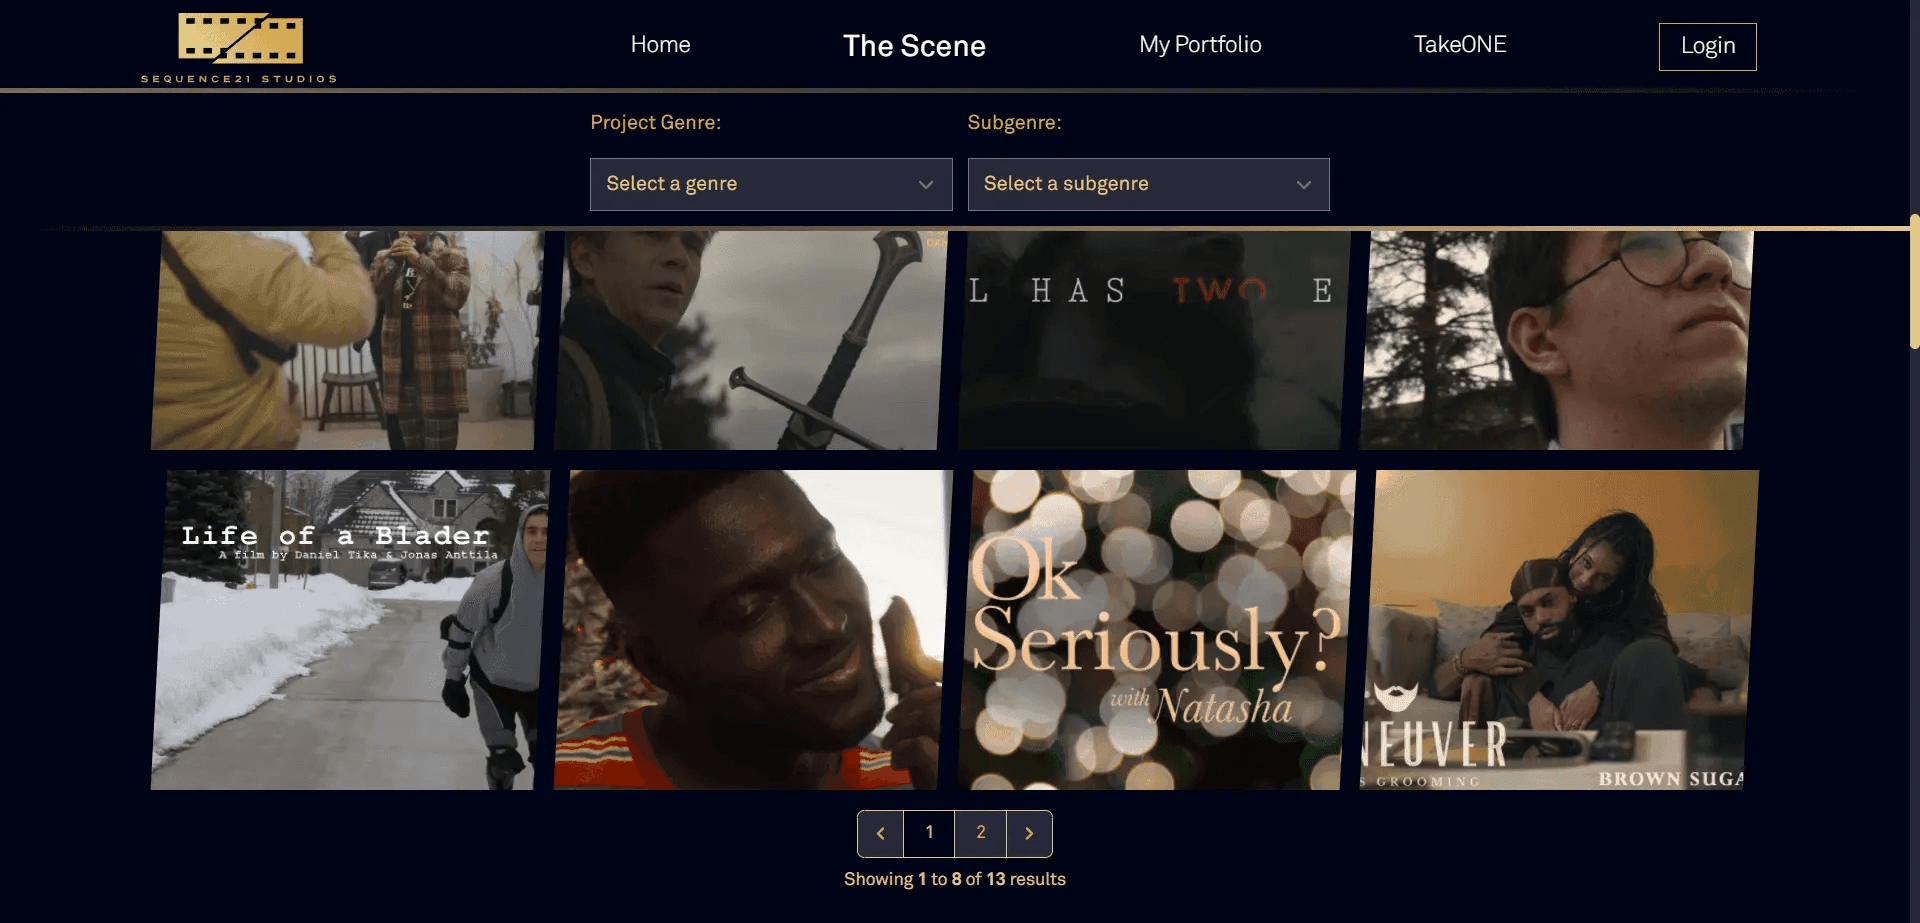 Several projects from The Scene are displayed in a grid format, along with their project images